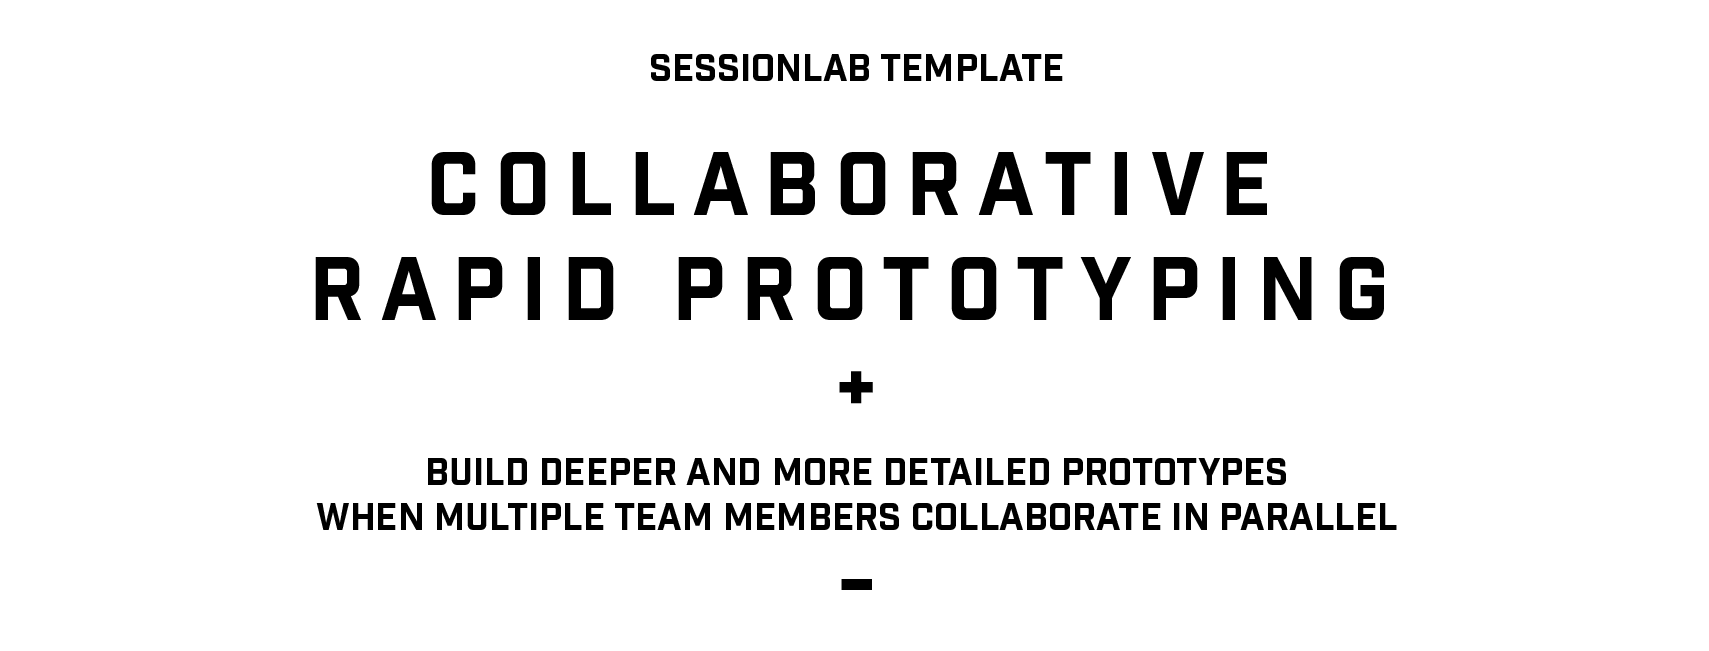 Collaborative Rapid Prototyping - cover image